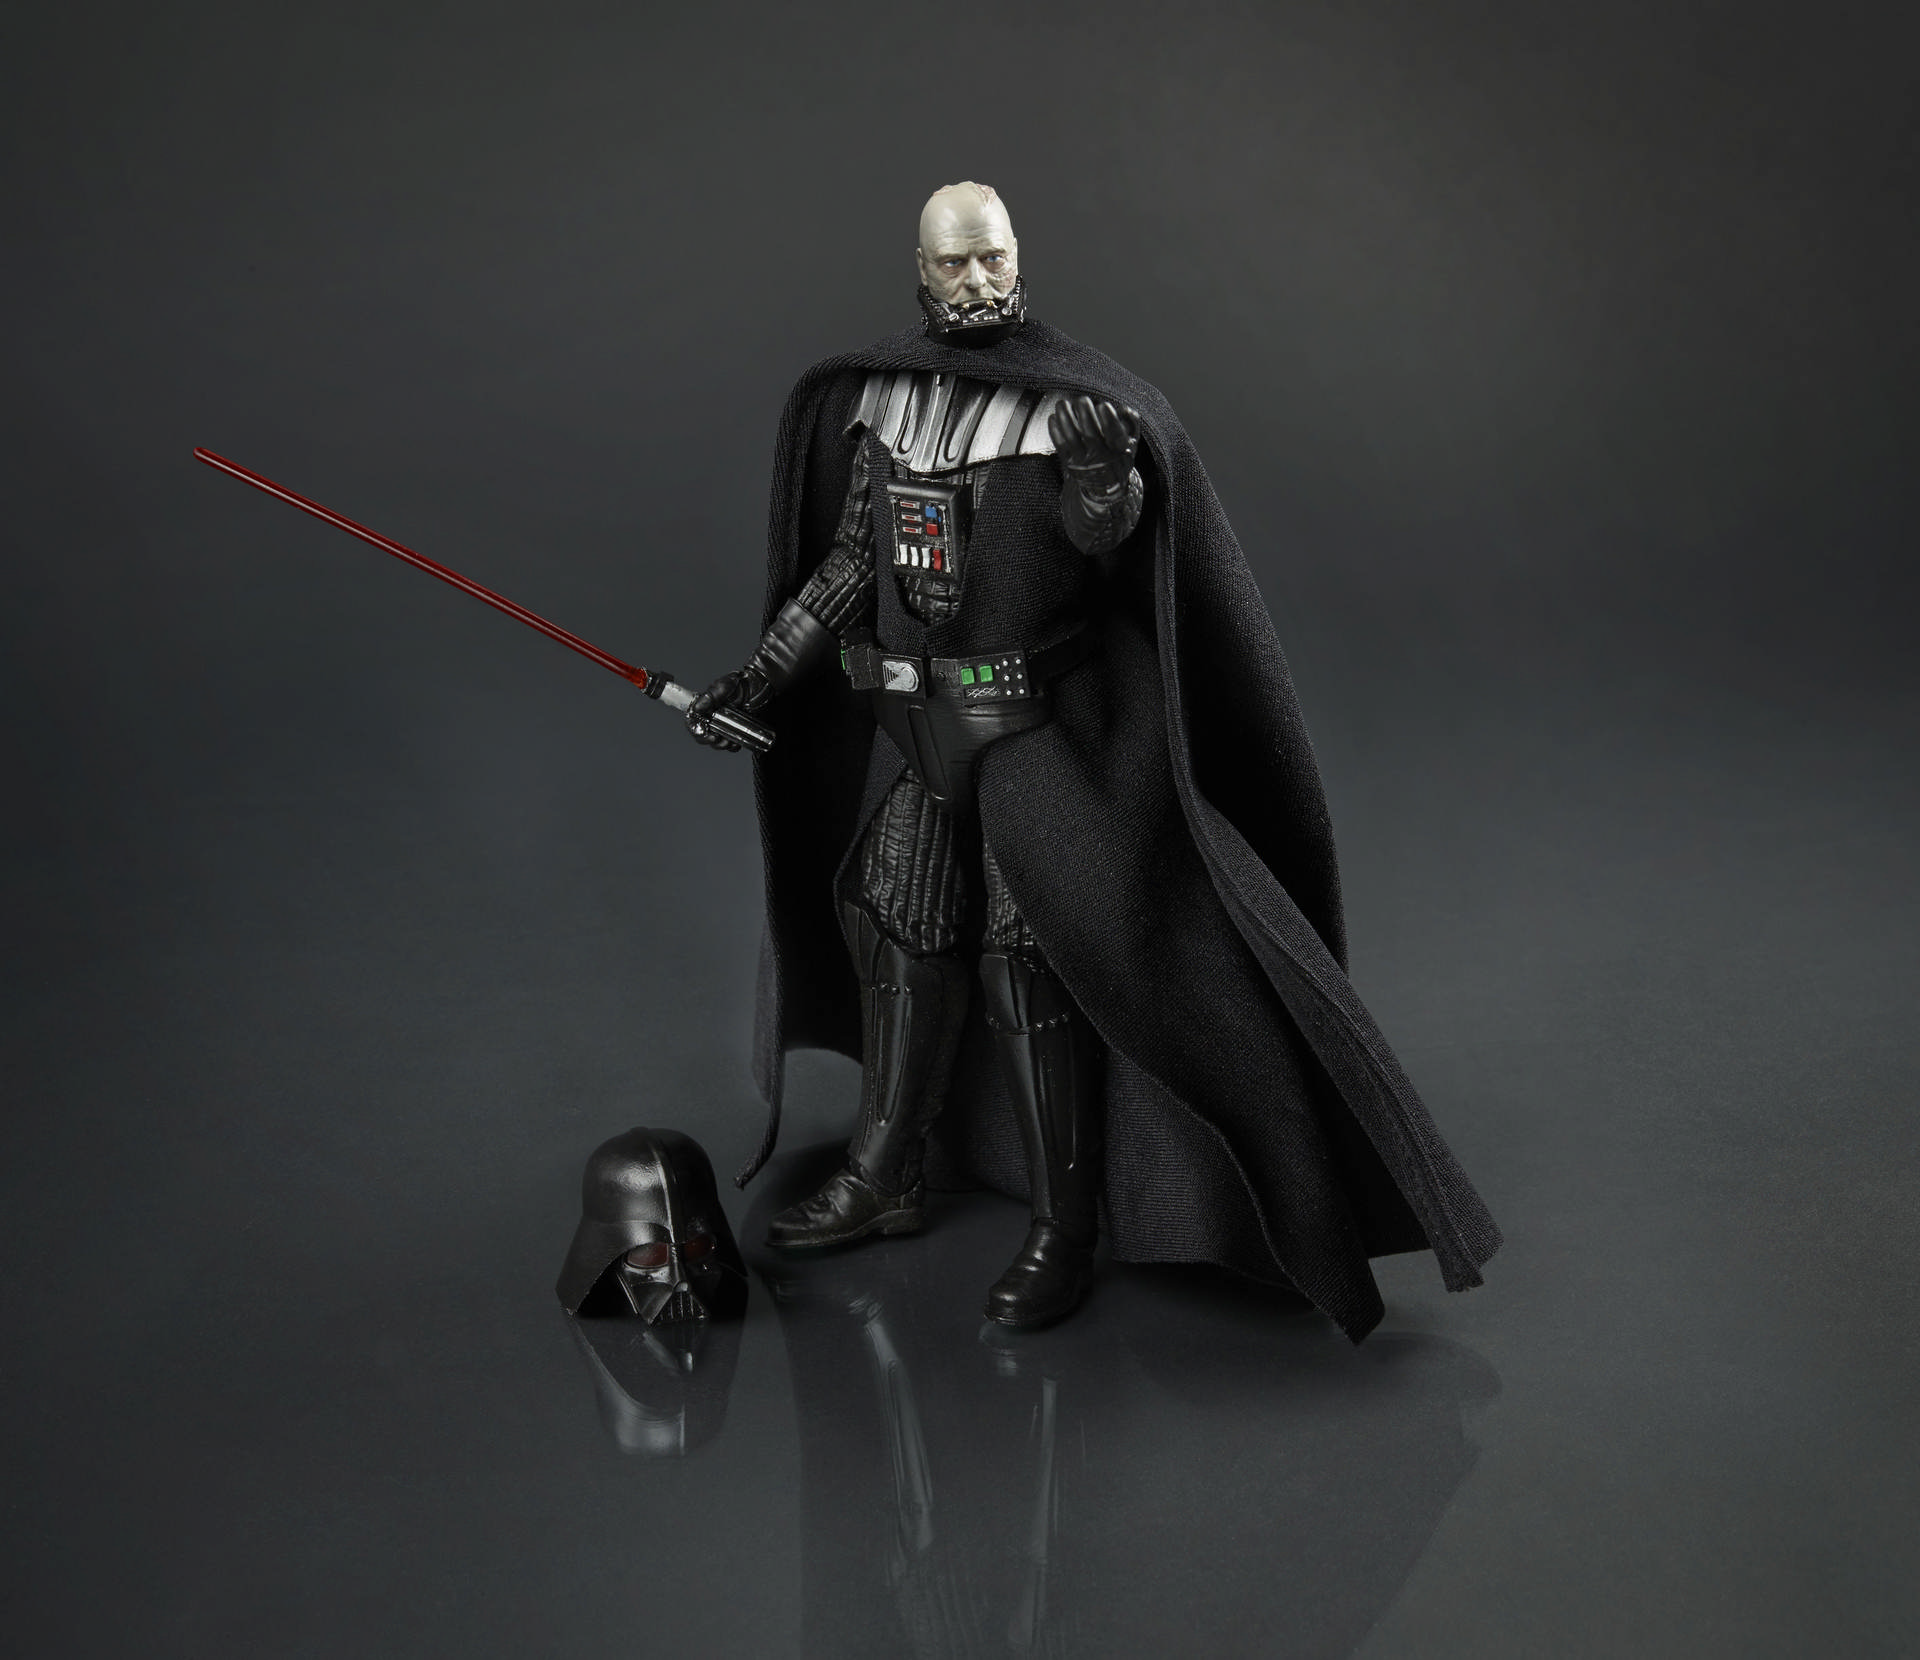 Yup, These Are The Best Star Wars Action Figures On The Planet